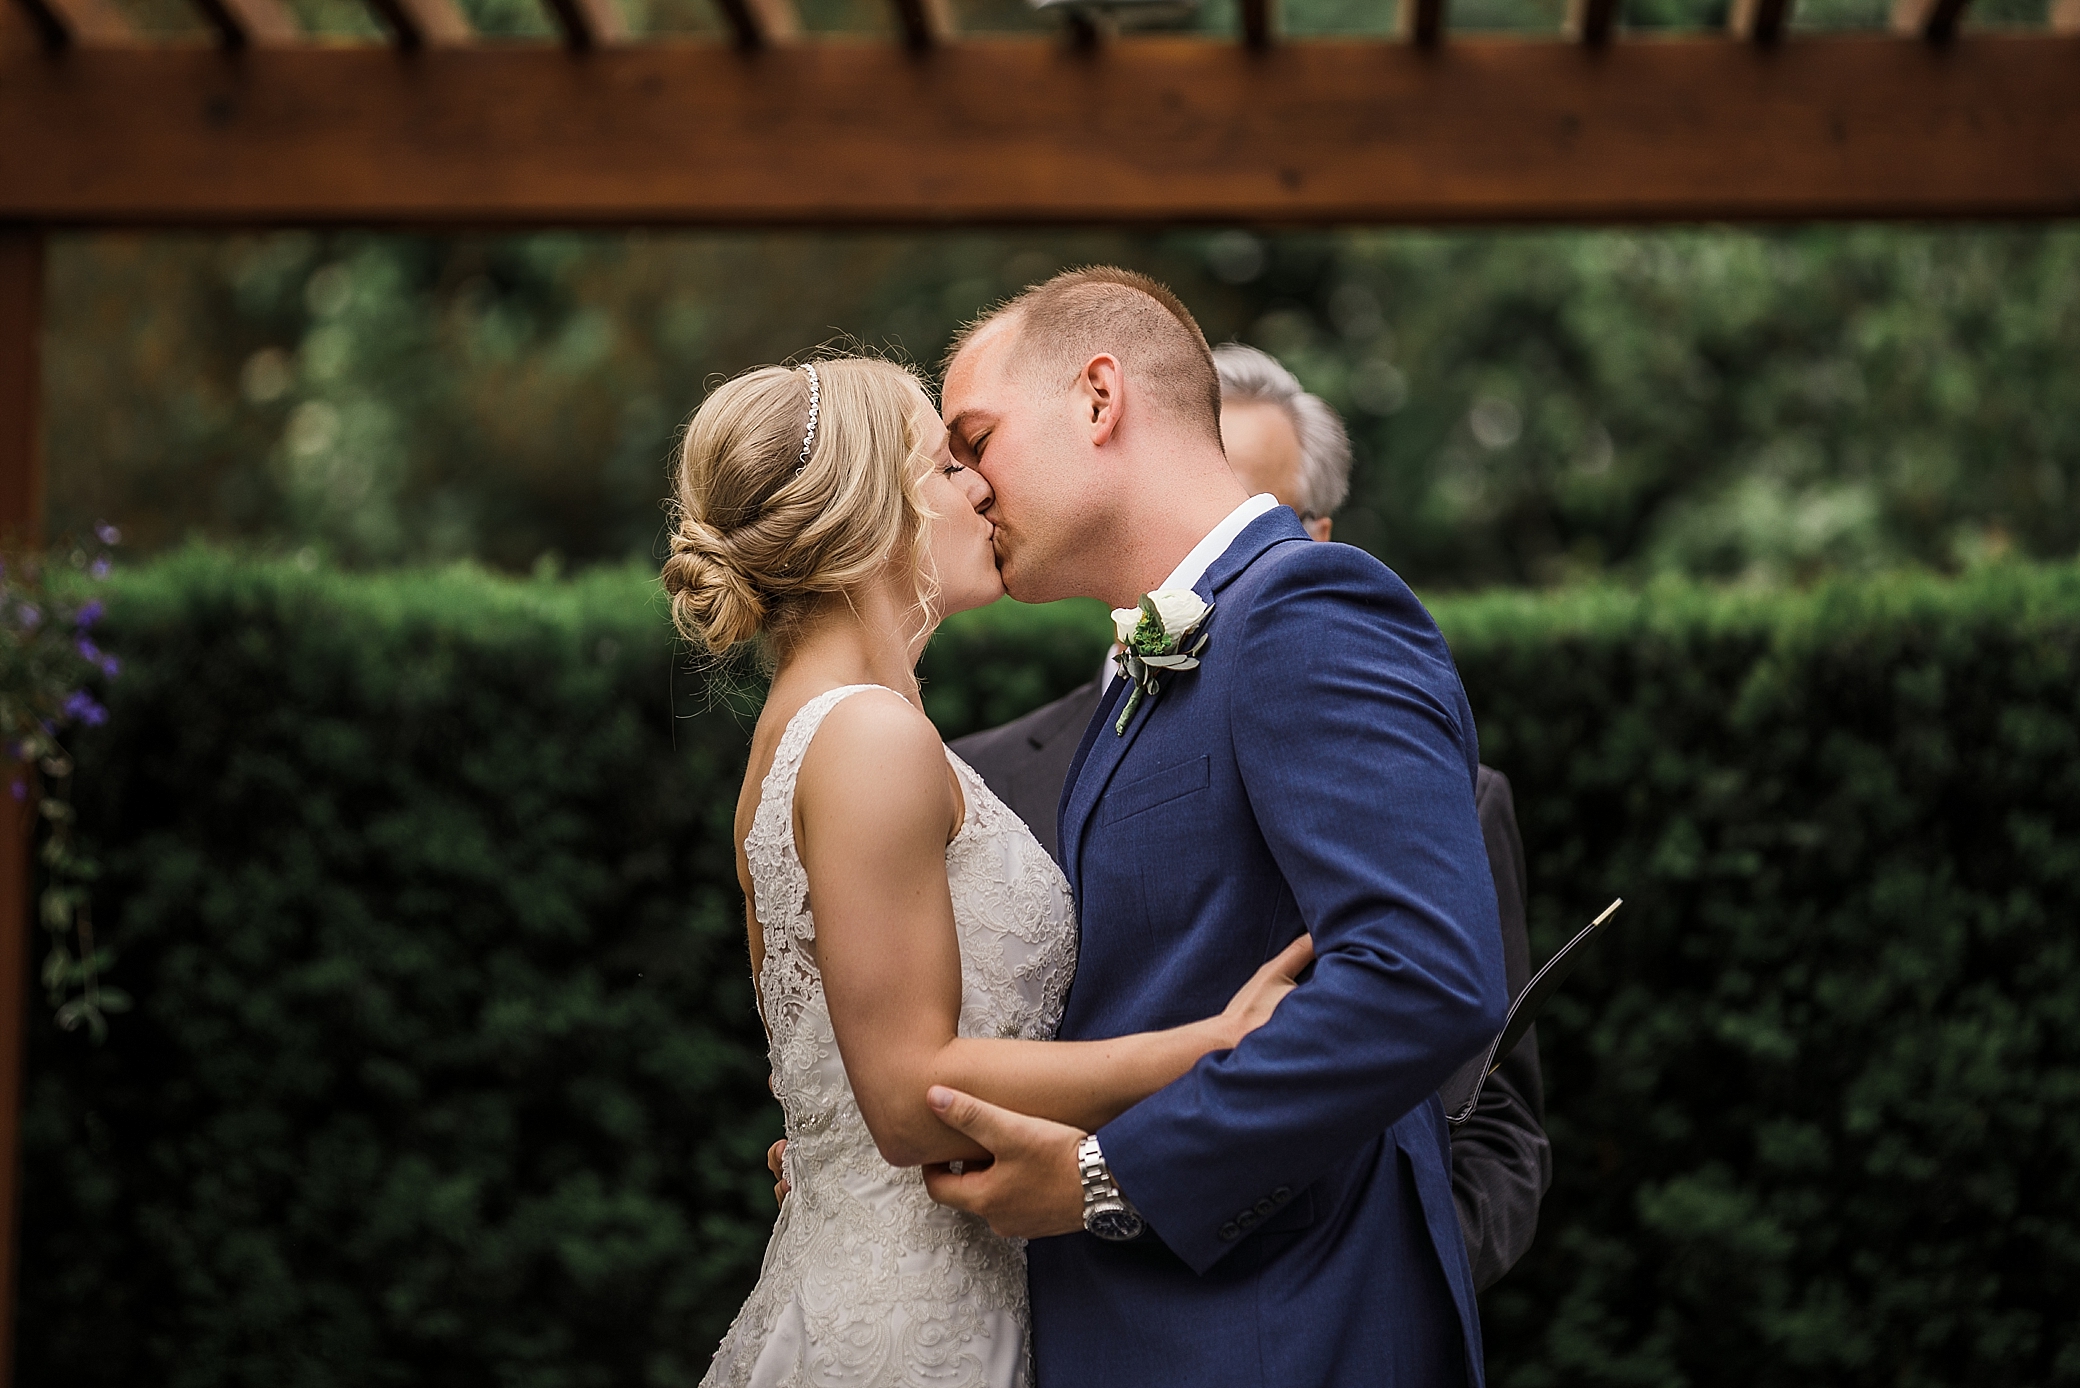 Bride and groom first kiss | Megan Montalvo Photography 